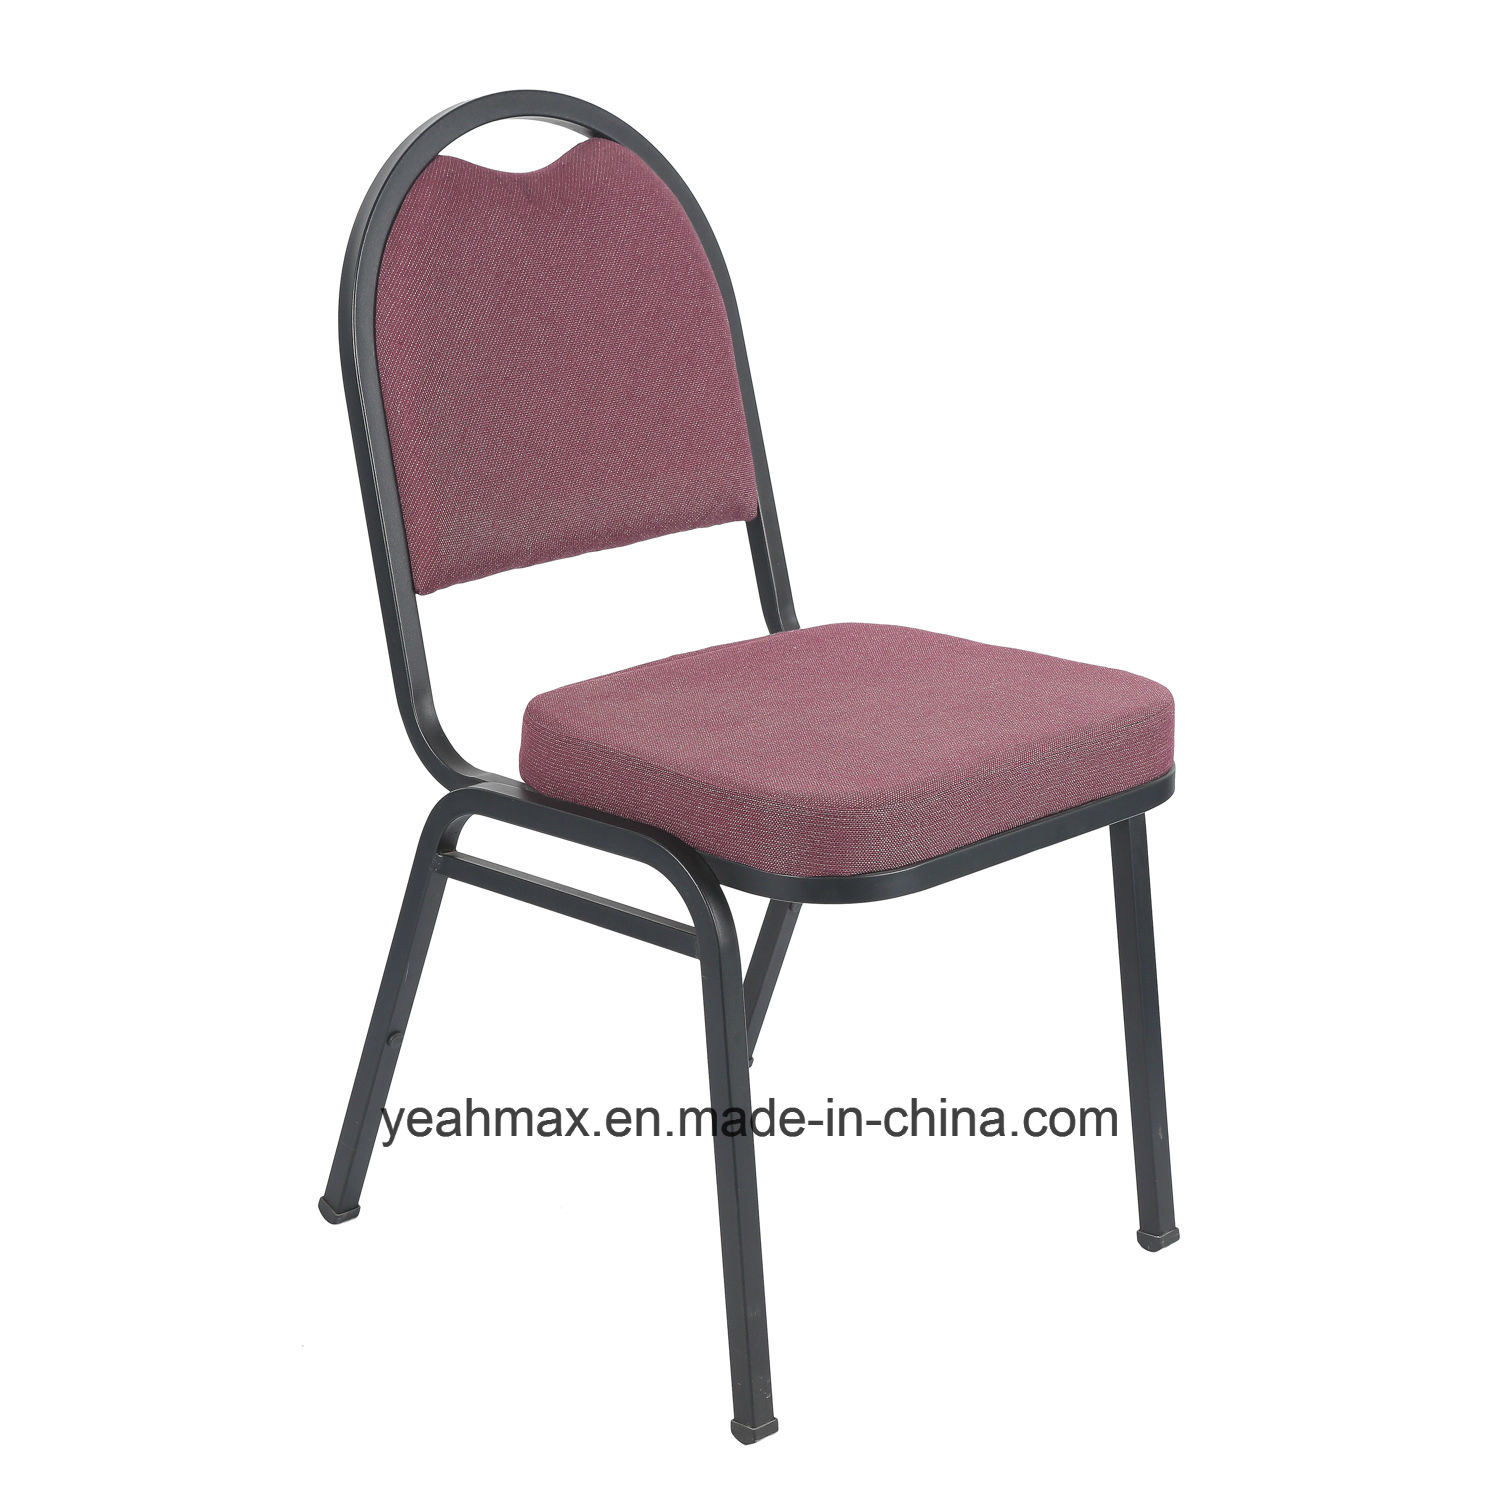 Red Fabric Upholstered Stacking Chair